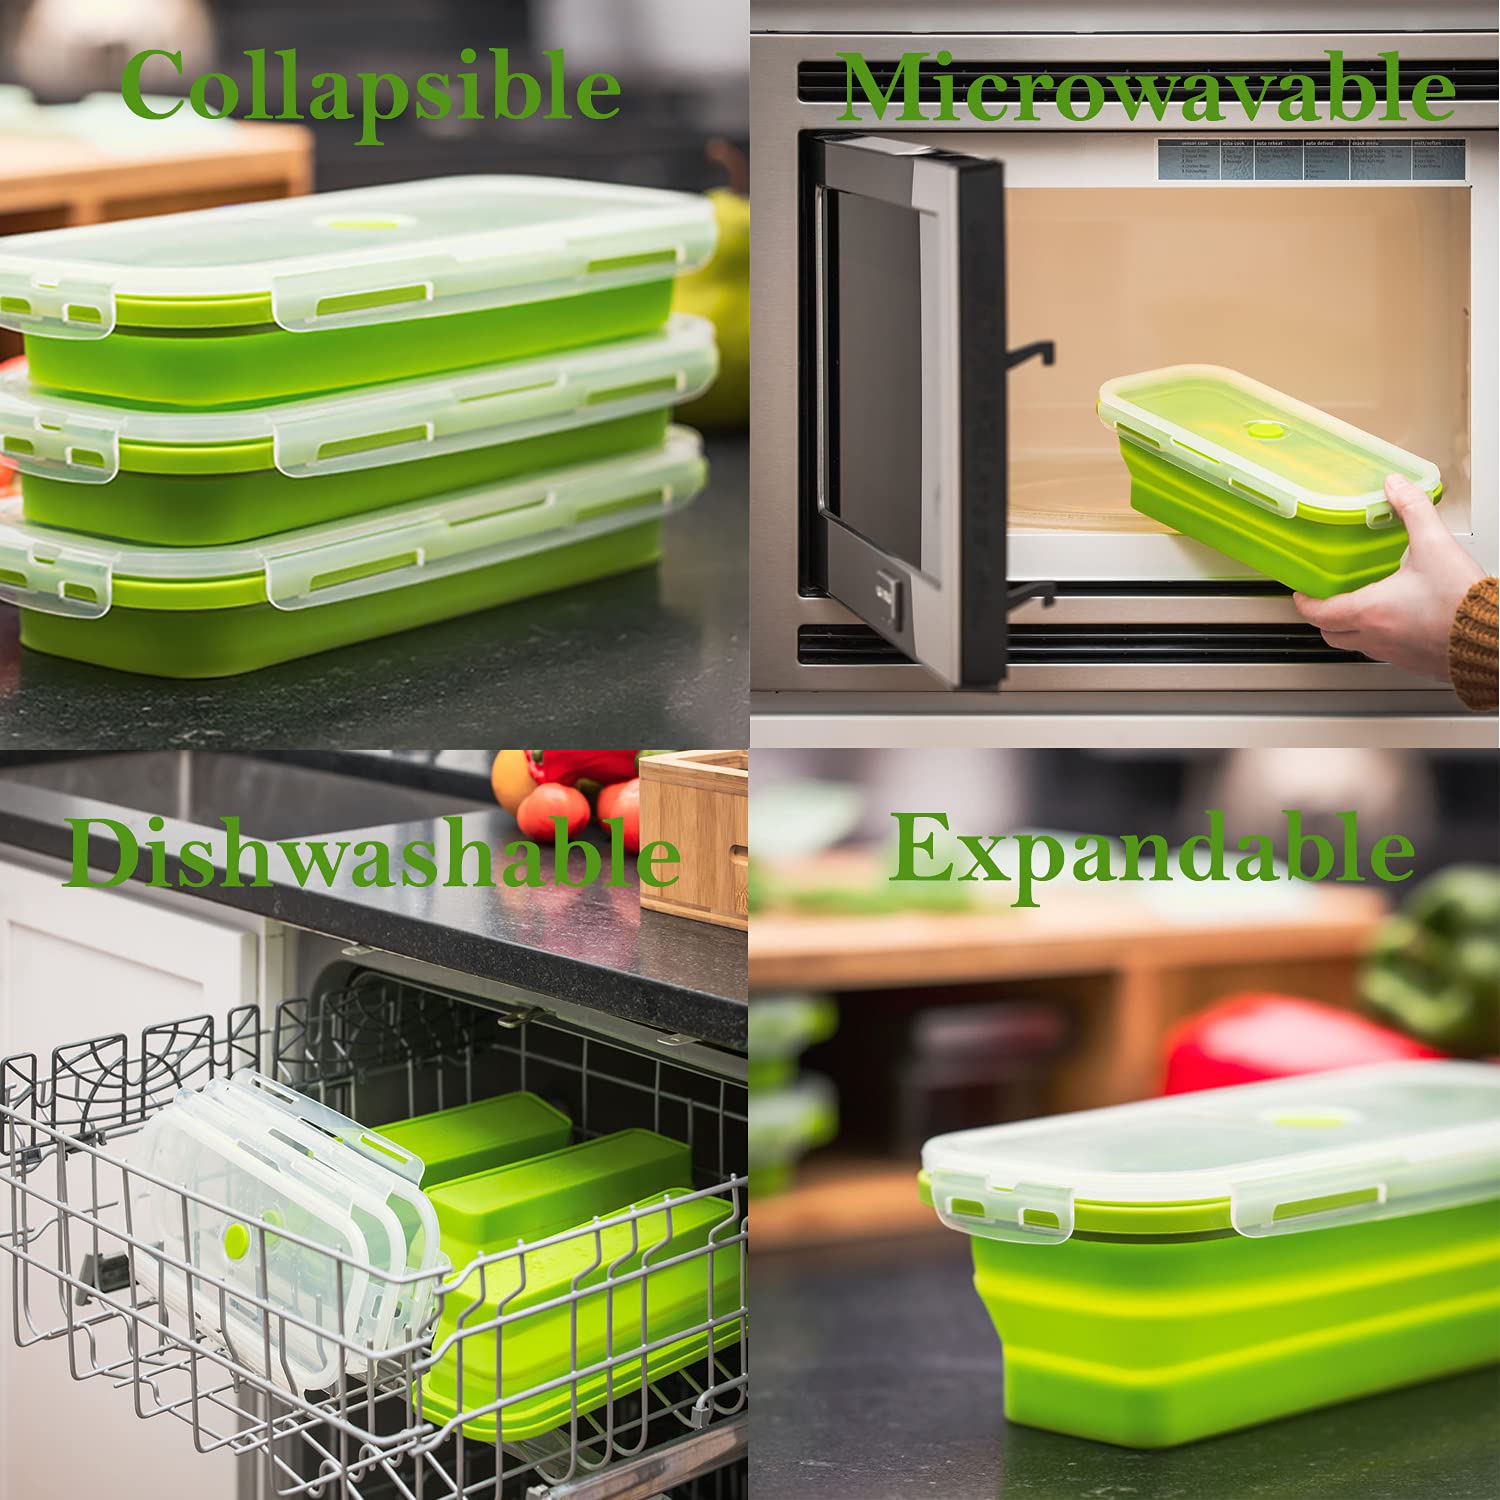 Over The Sink Bamboo Cutting Board with Collapsible Containers With Seal Tight Lids